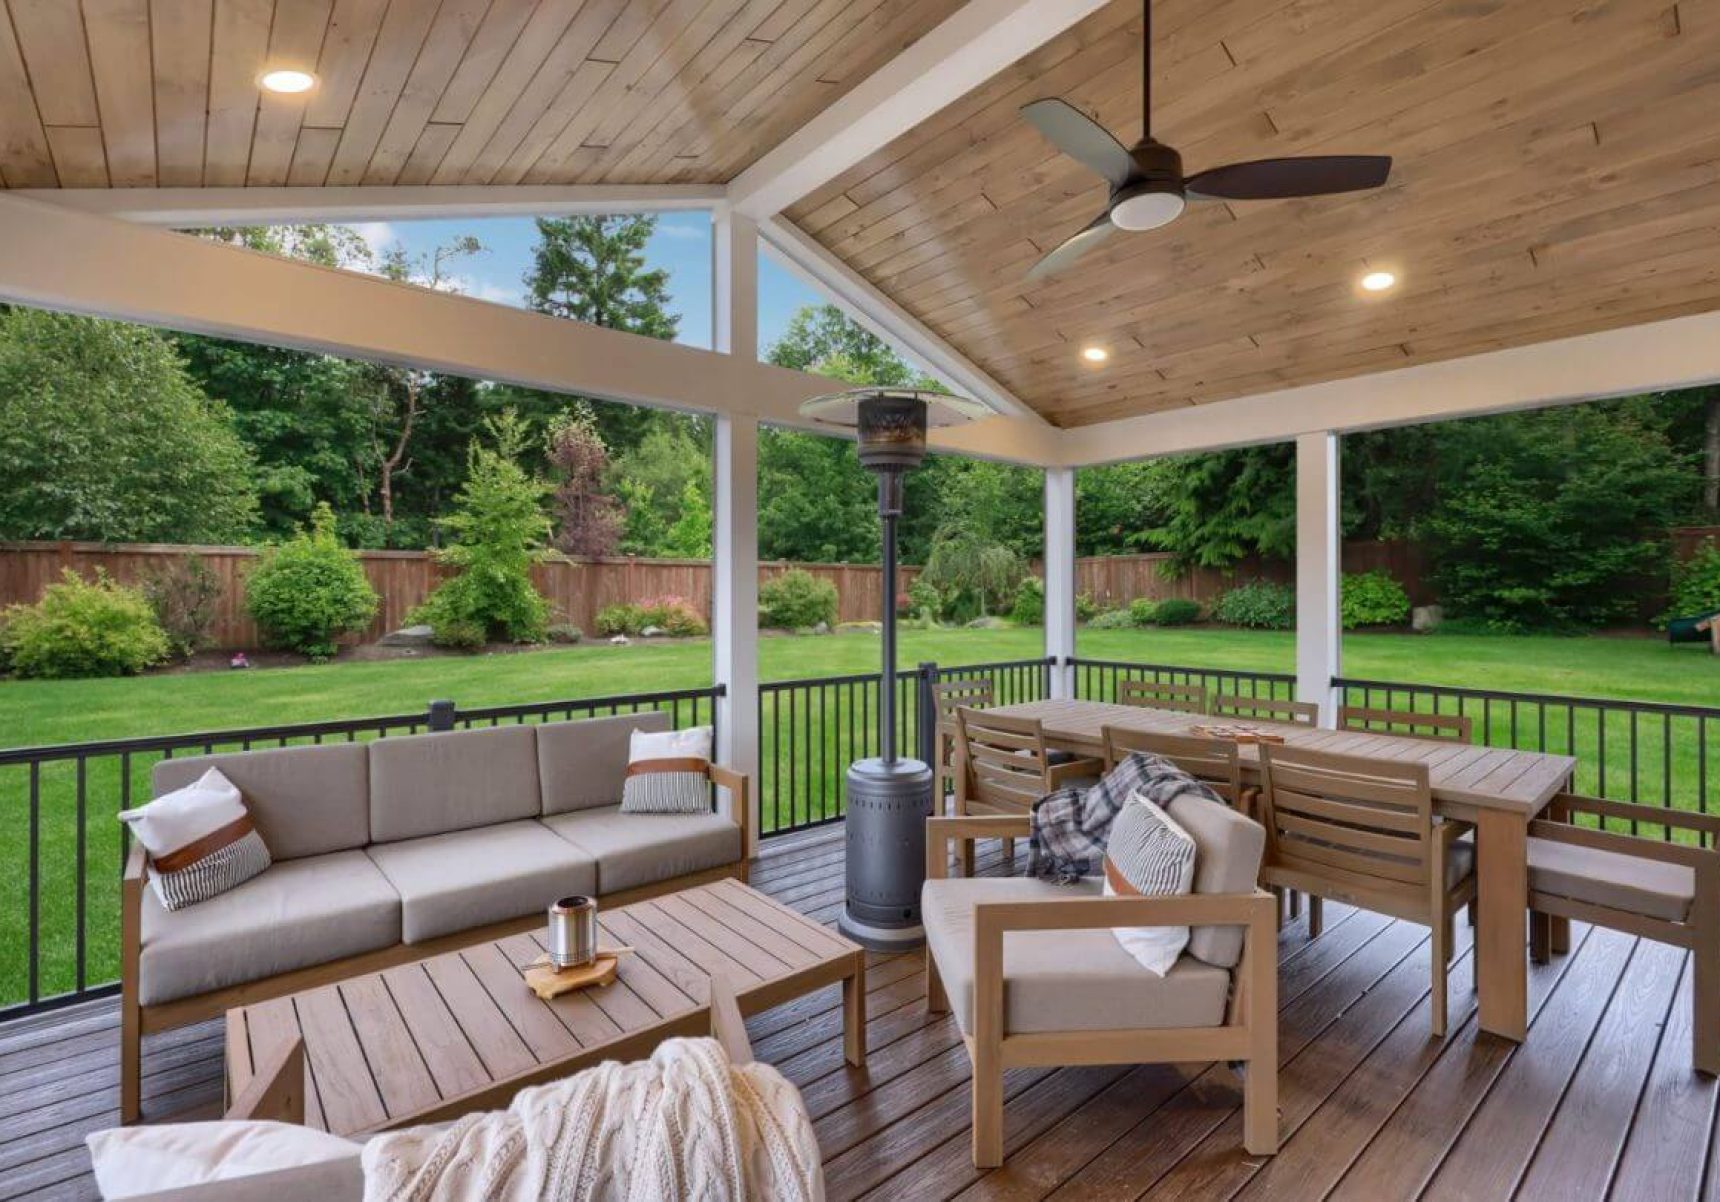 outdoor deck with ceiling, outdoor furniture surrounded by green yard